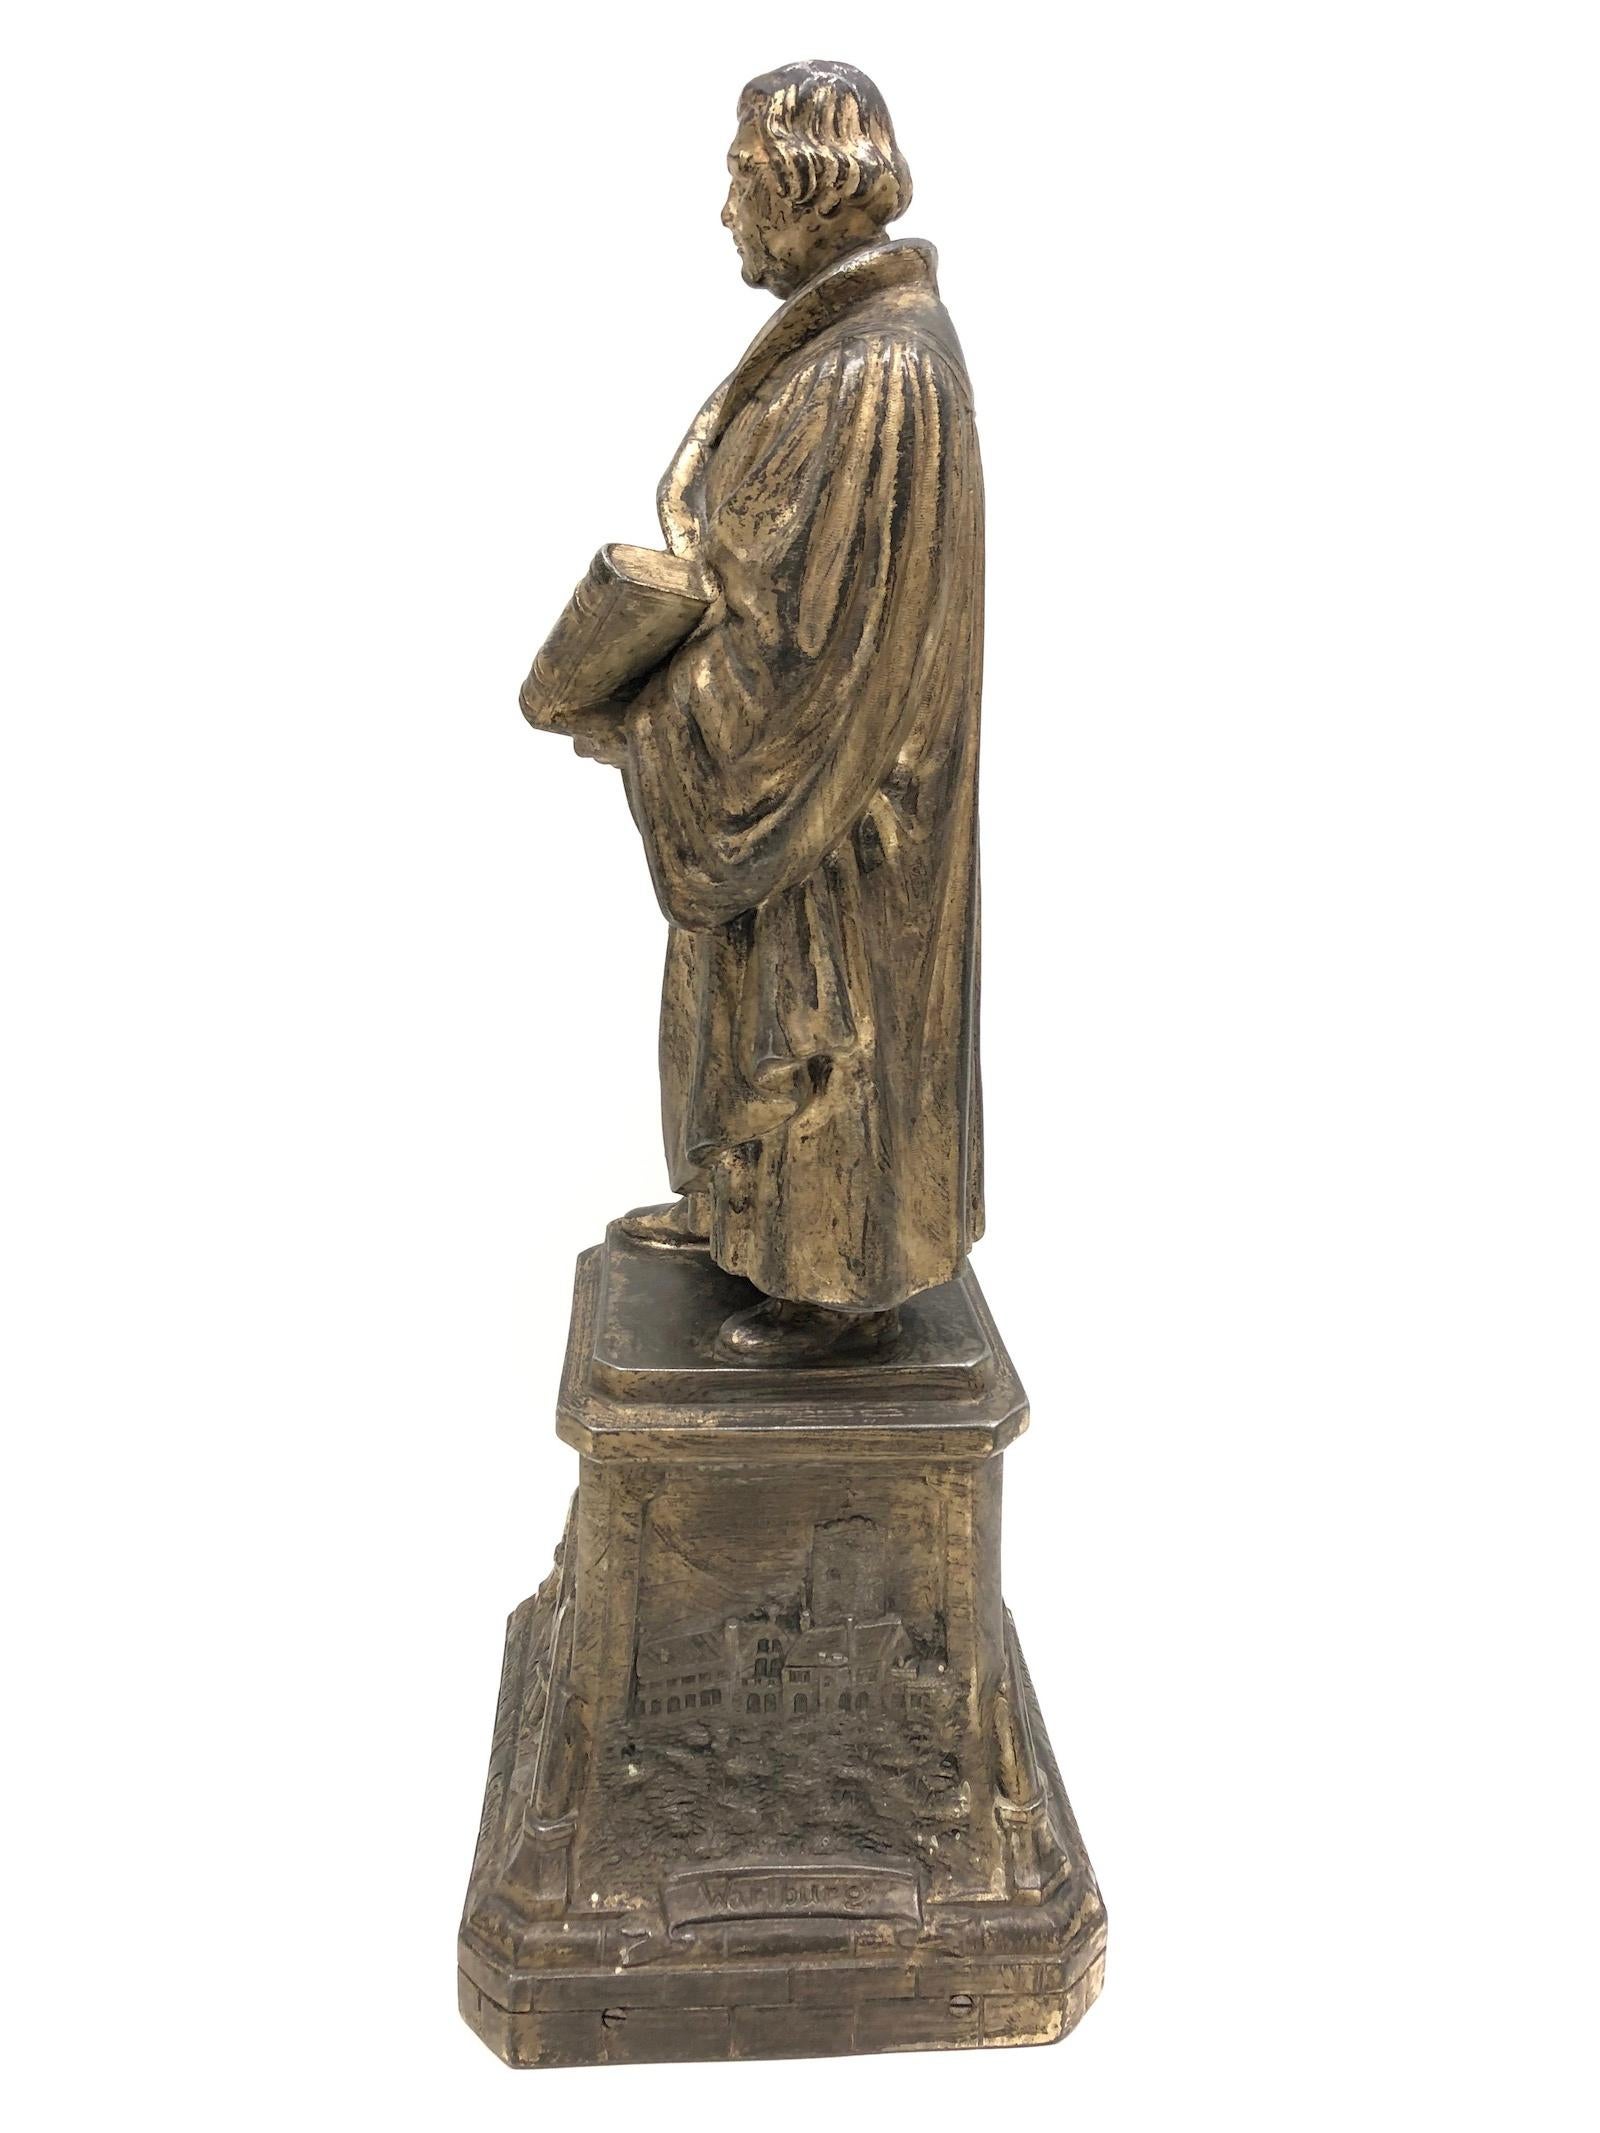 A decorative Martin Luther sculpture or statue. Some wear with a nice patina. Made of metal.